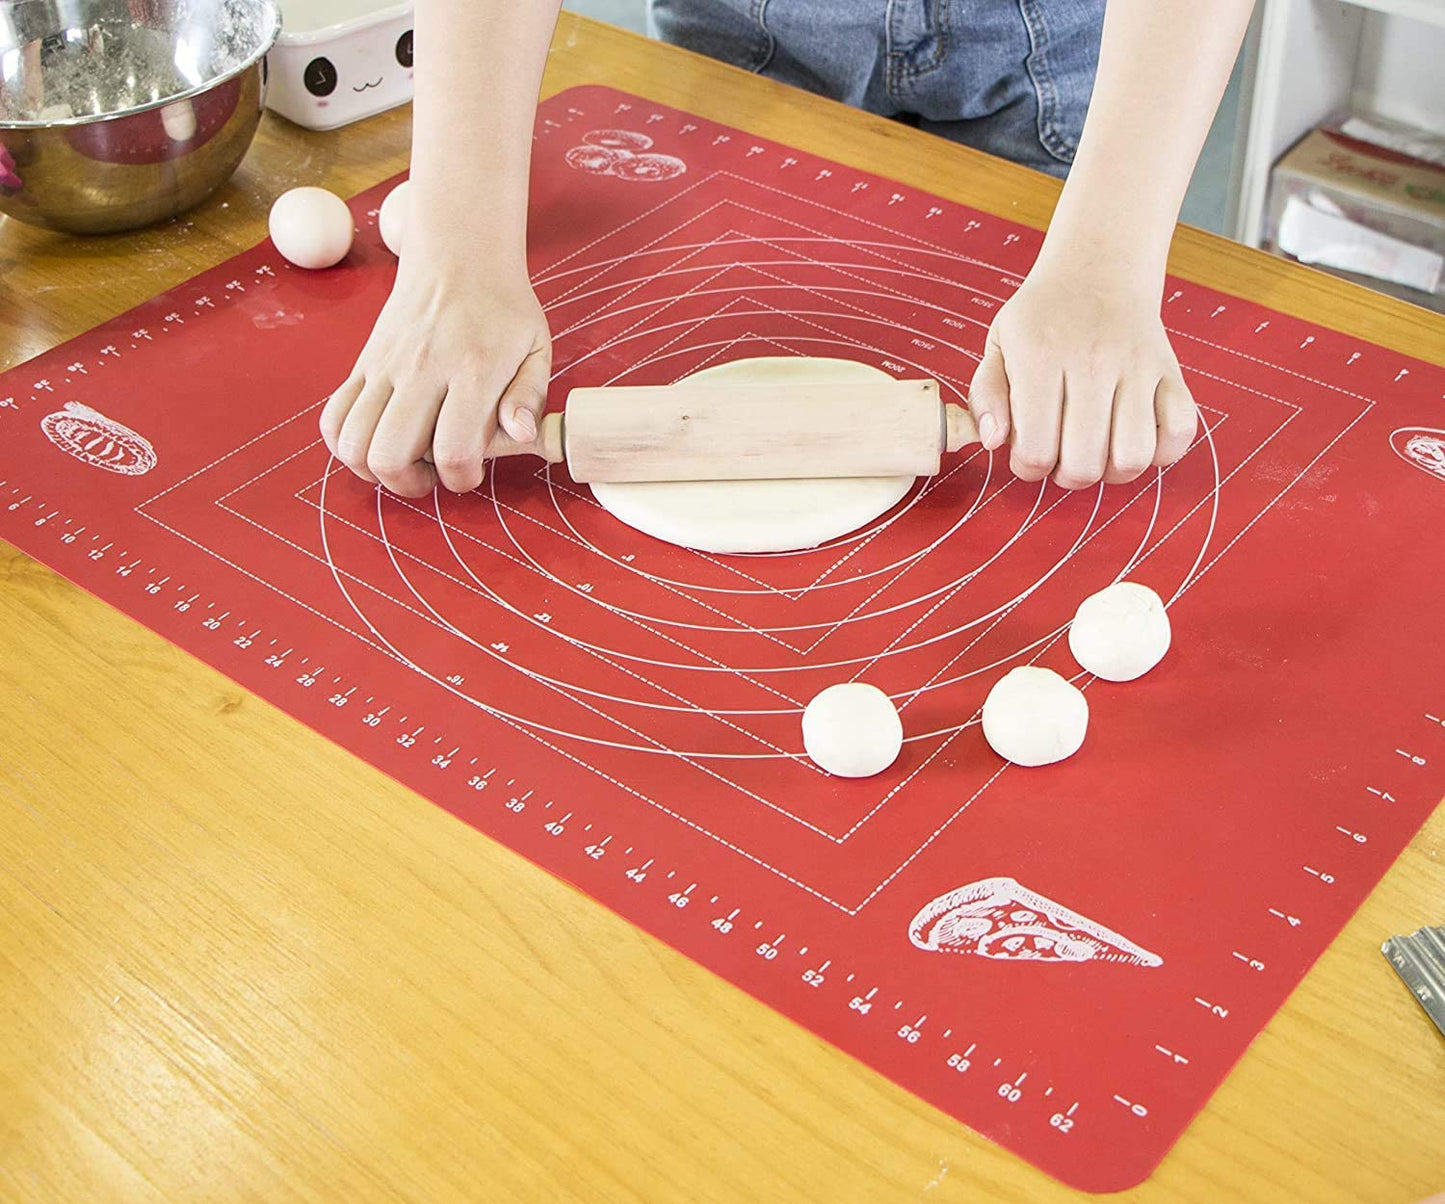 Webake 26 x 18 Inch non stick silicone pastry non slip countertop protector baking mat for rolling dough with measurements (Red)